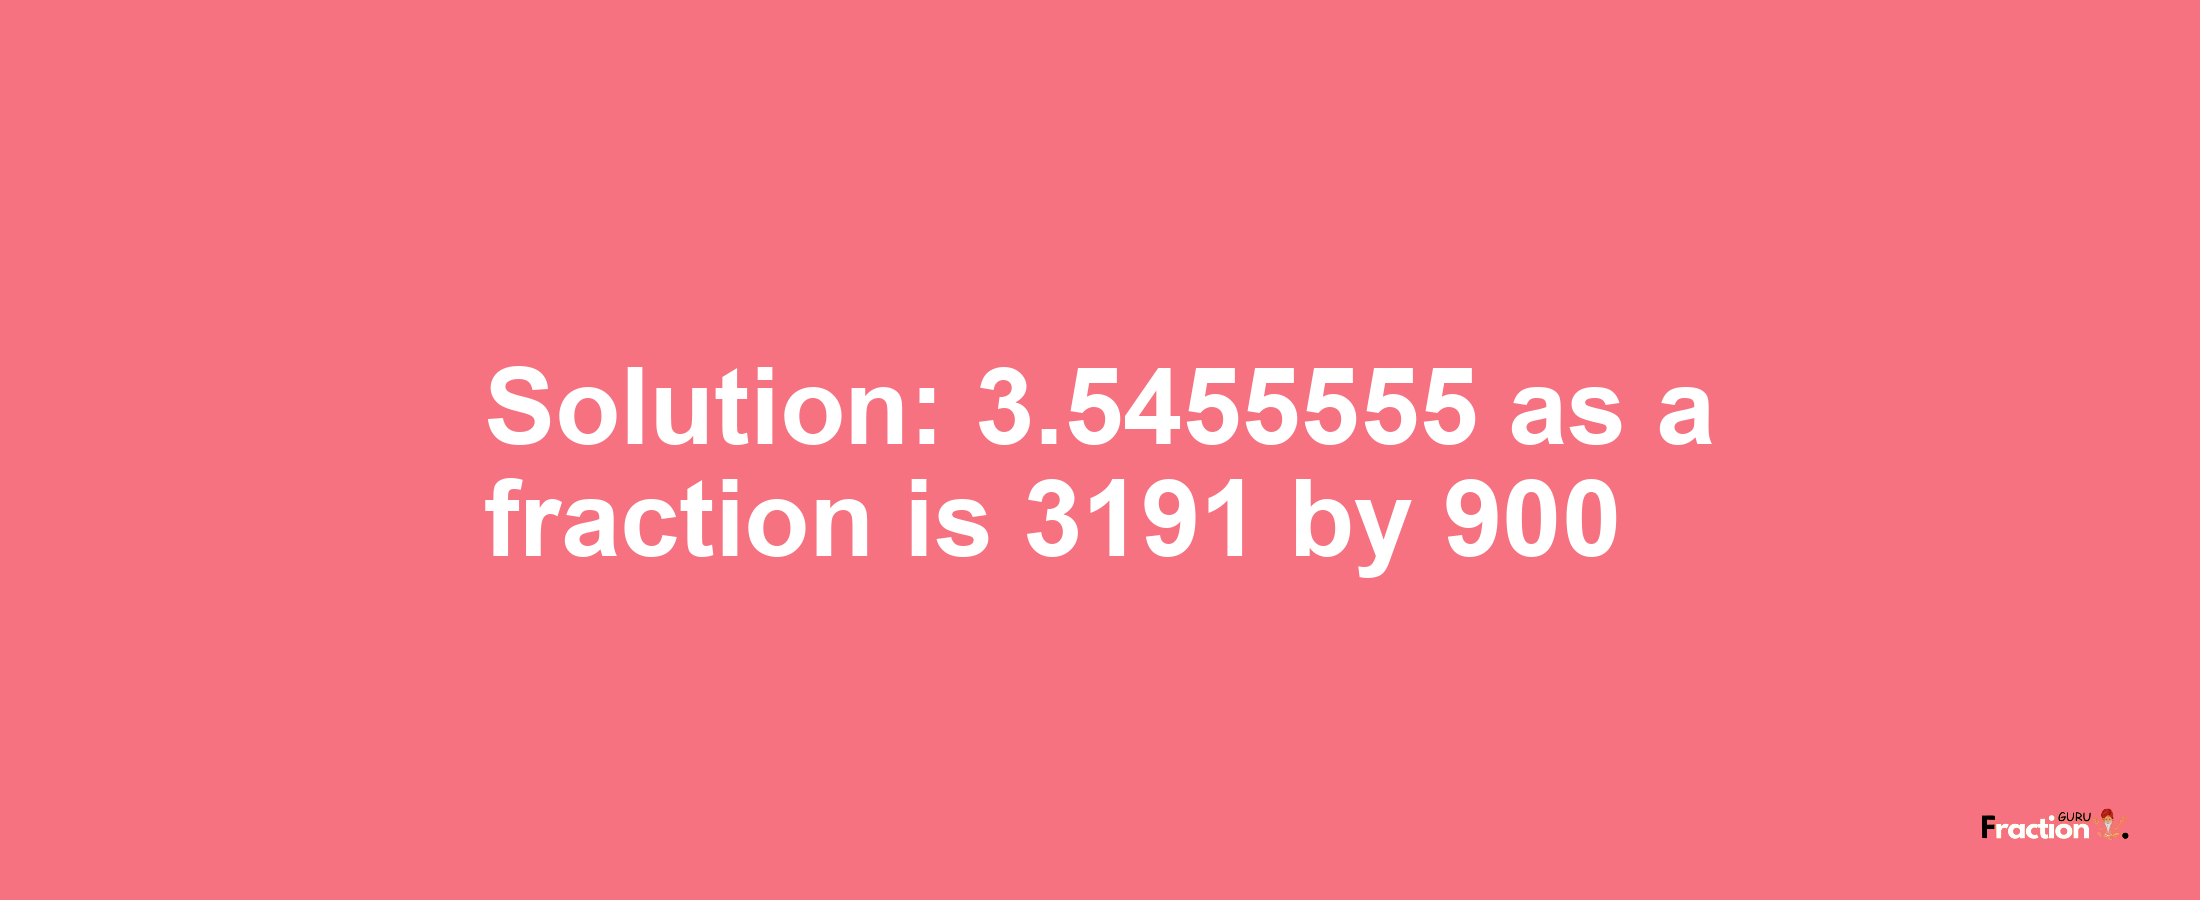 Solution:3.5455555 as a fraction is 3191/900